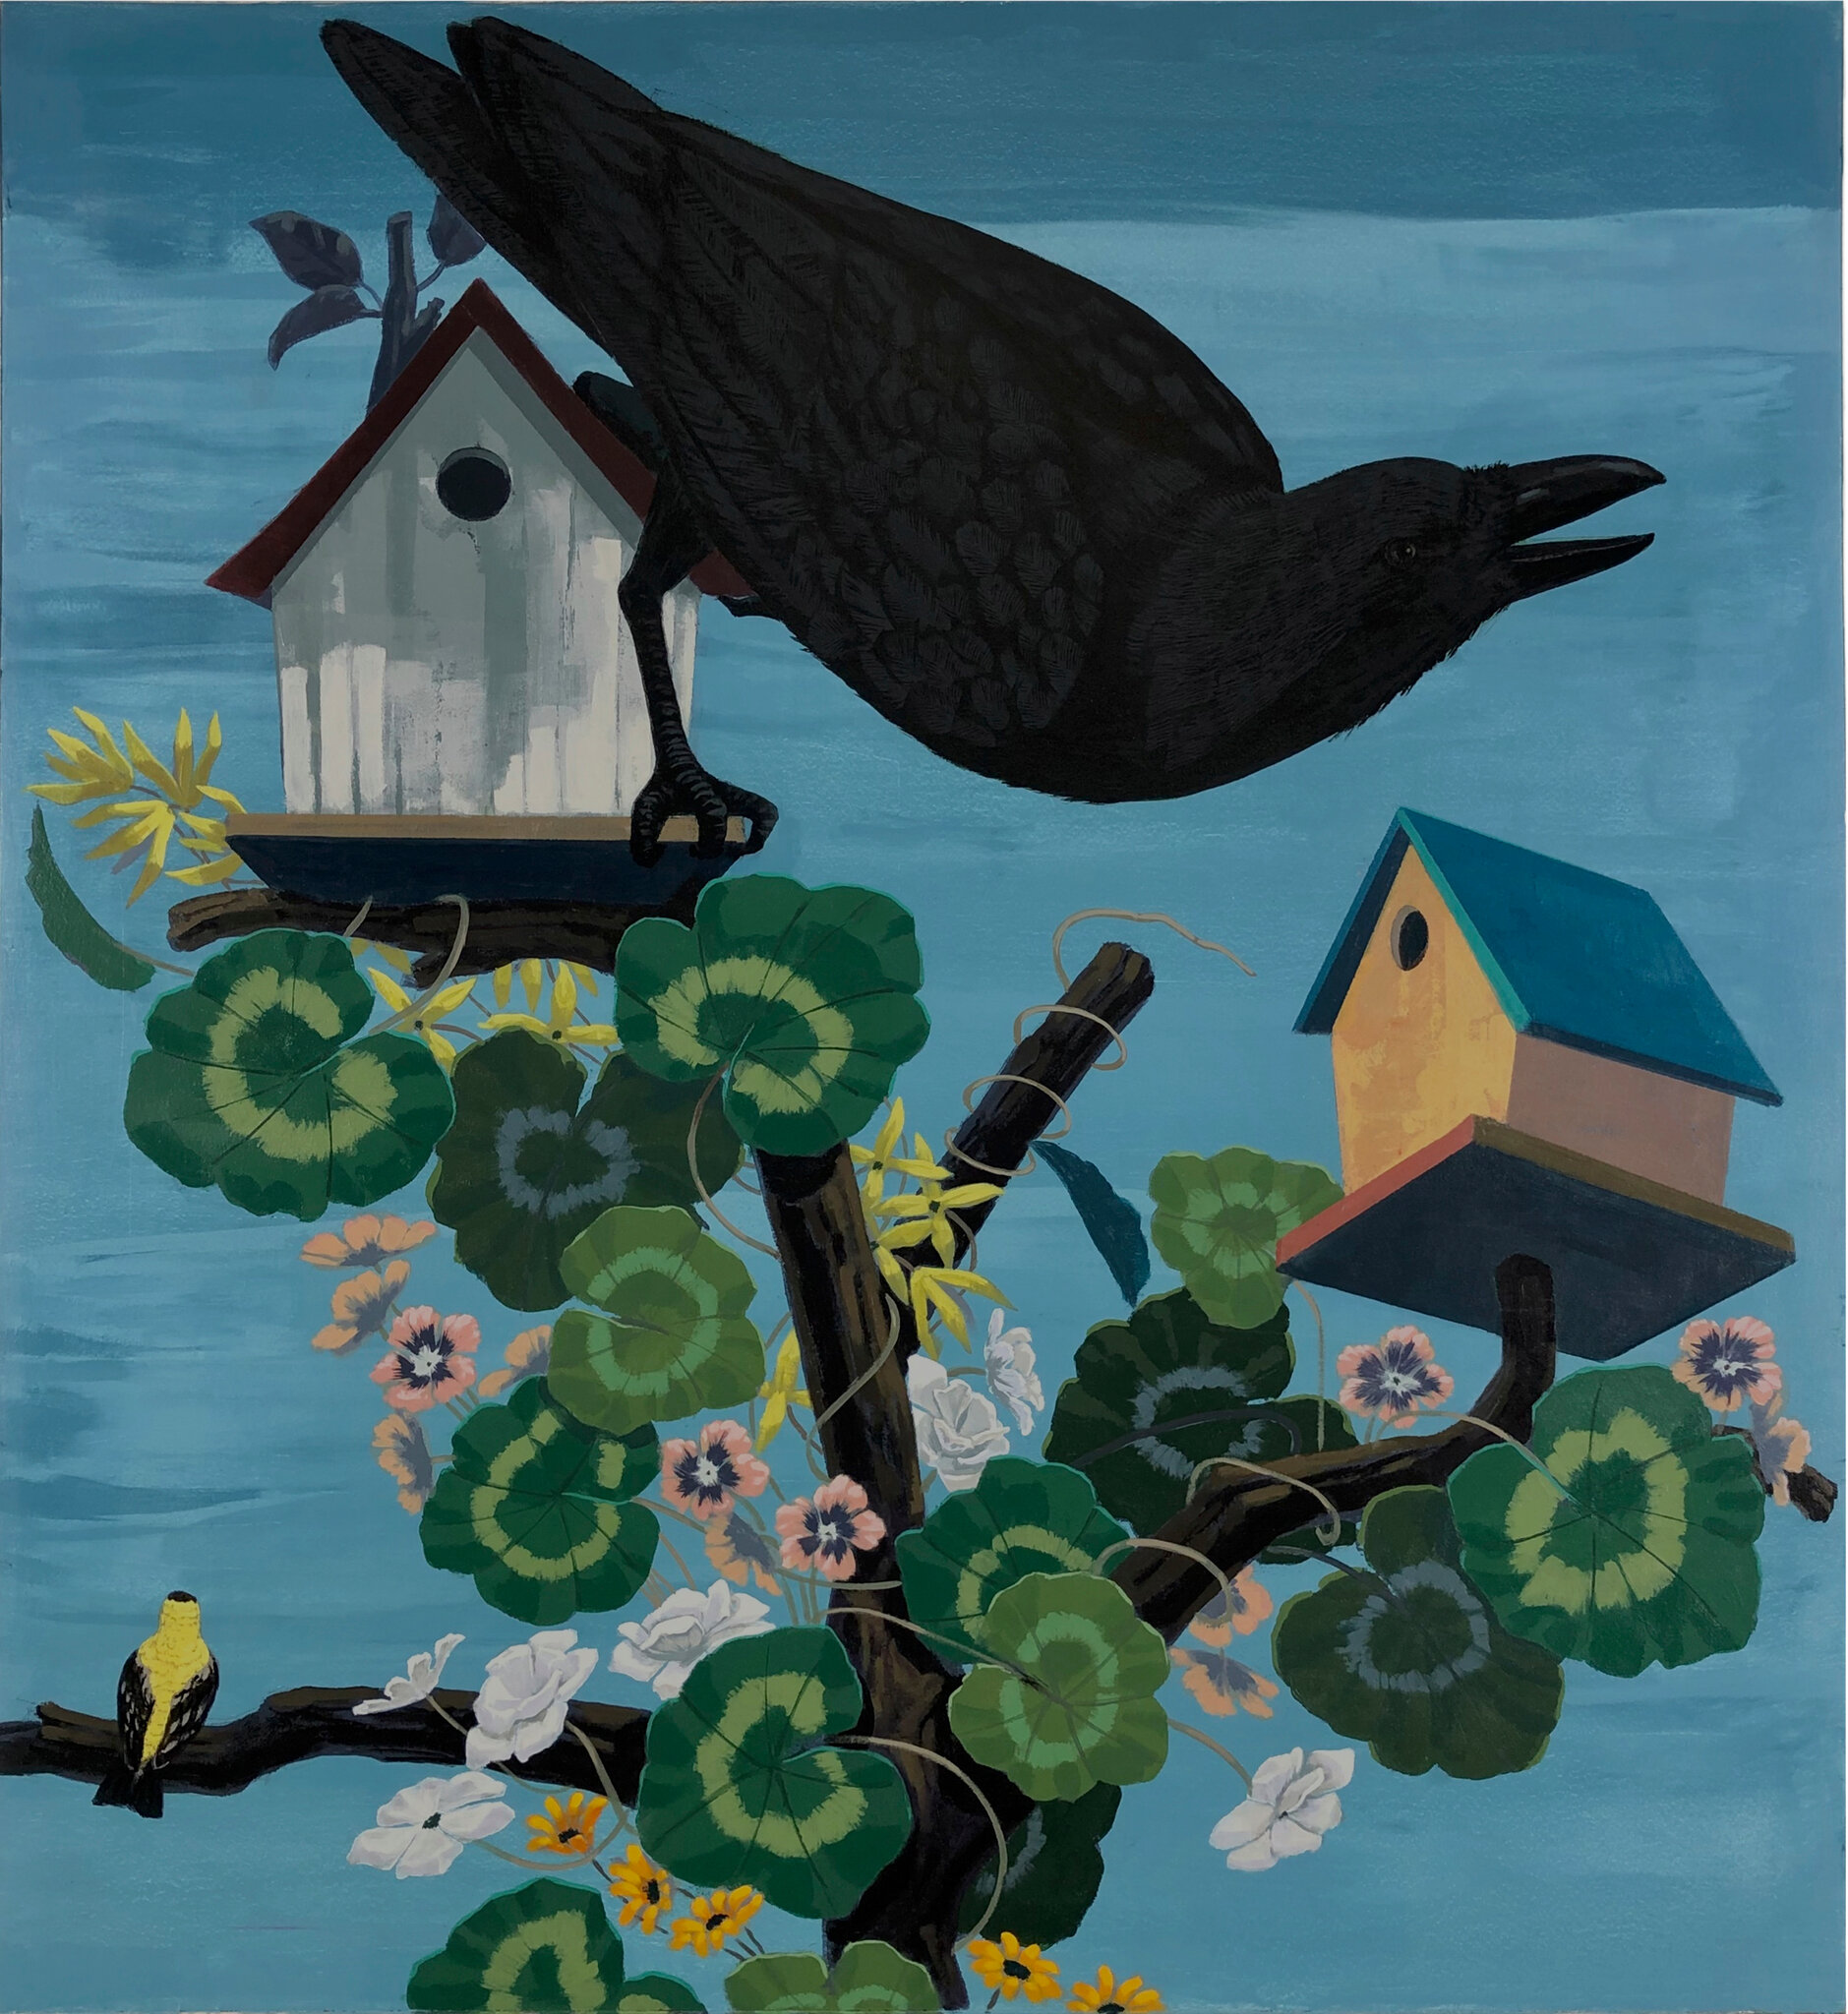 Black and part Black Birds in America: (Crow, Goldfinch) 2020, by Kerry James Marshall